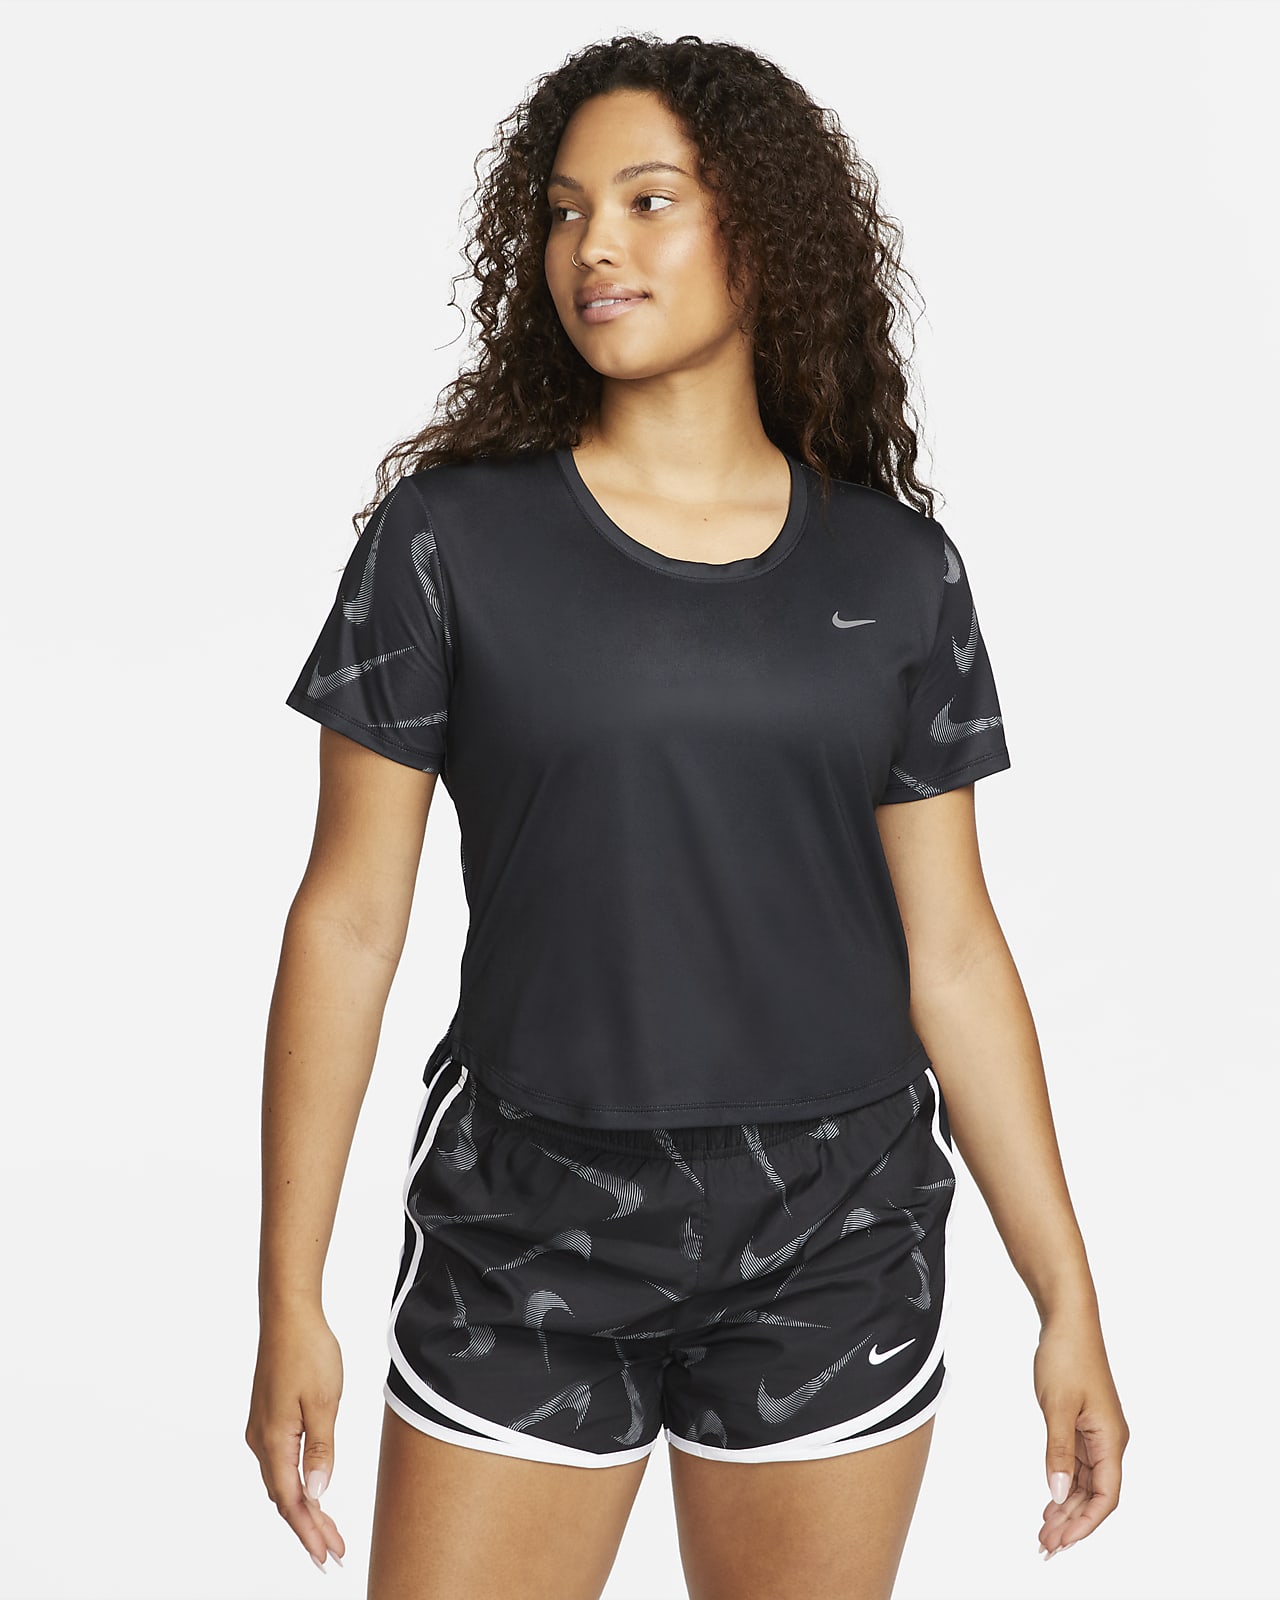 Stay stylish and comfortable with Nike Dri Fit Patterned Capri